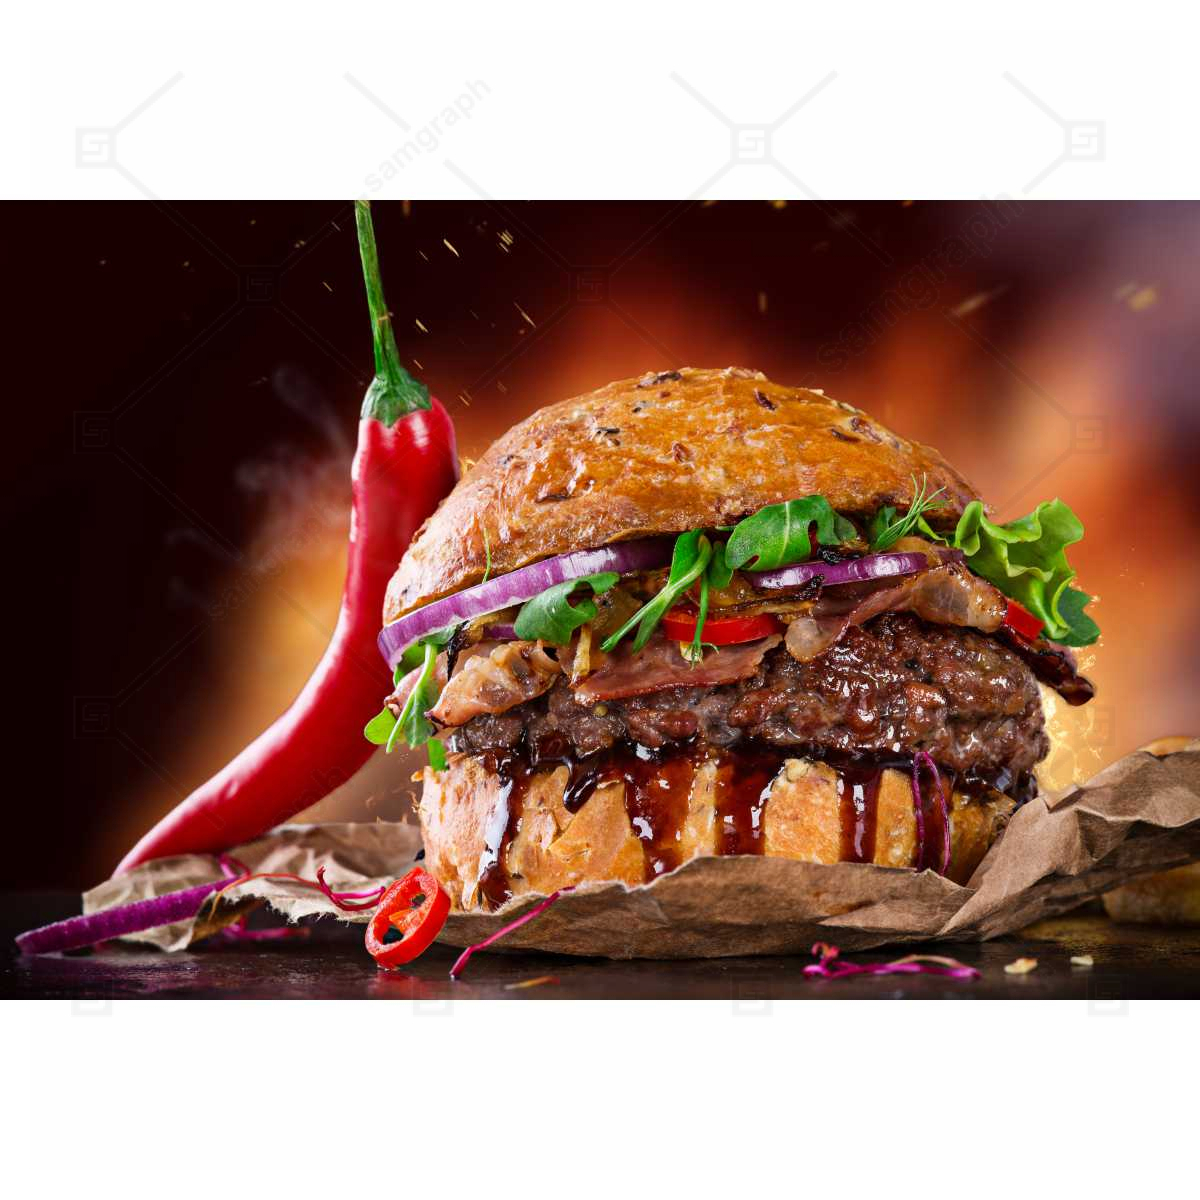 High quality photo of juicy hamburger with fire and pepper lettuce onion parsley 1 مجموعه کارت ویزیت-وکتور-تصویر-eps10_3